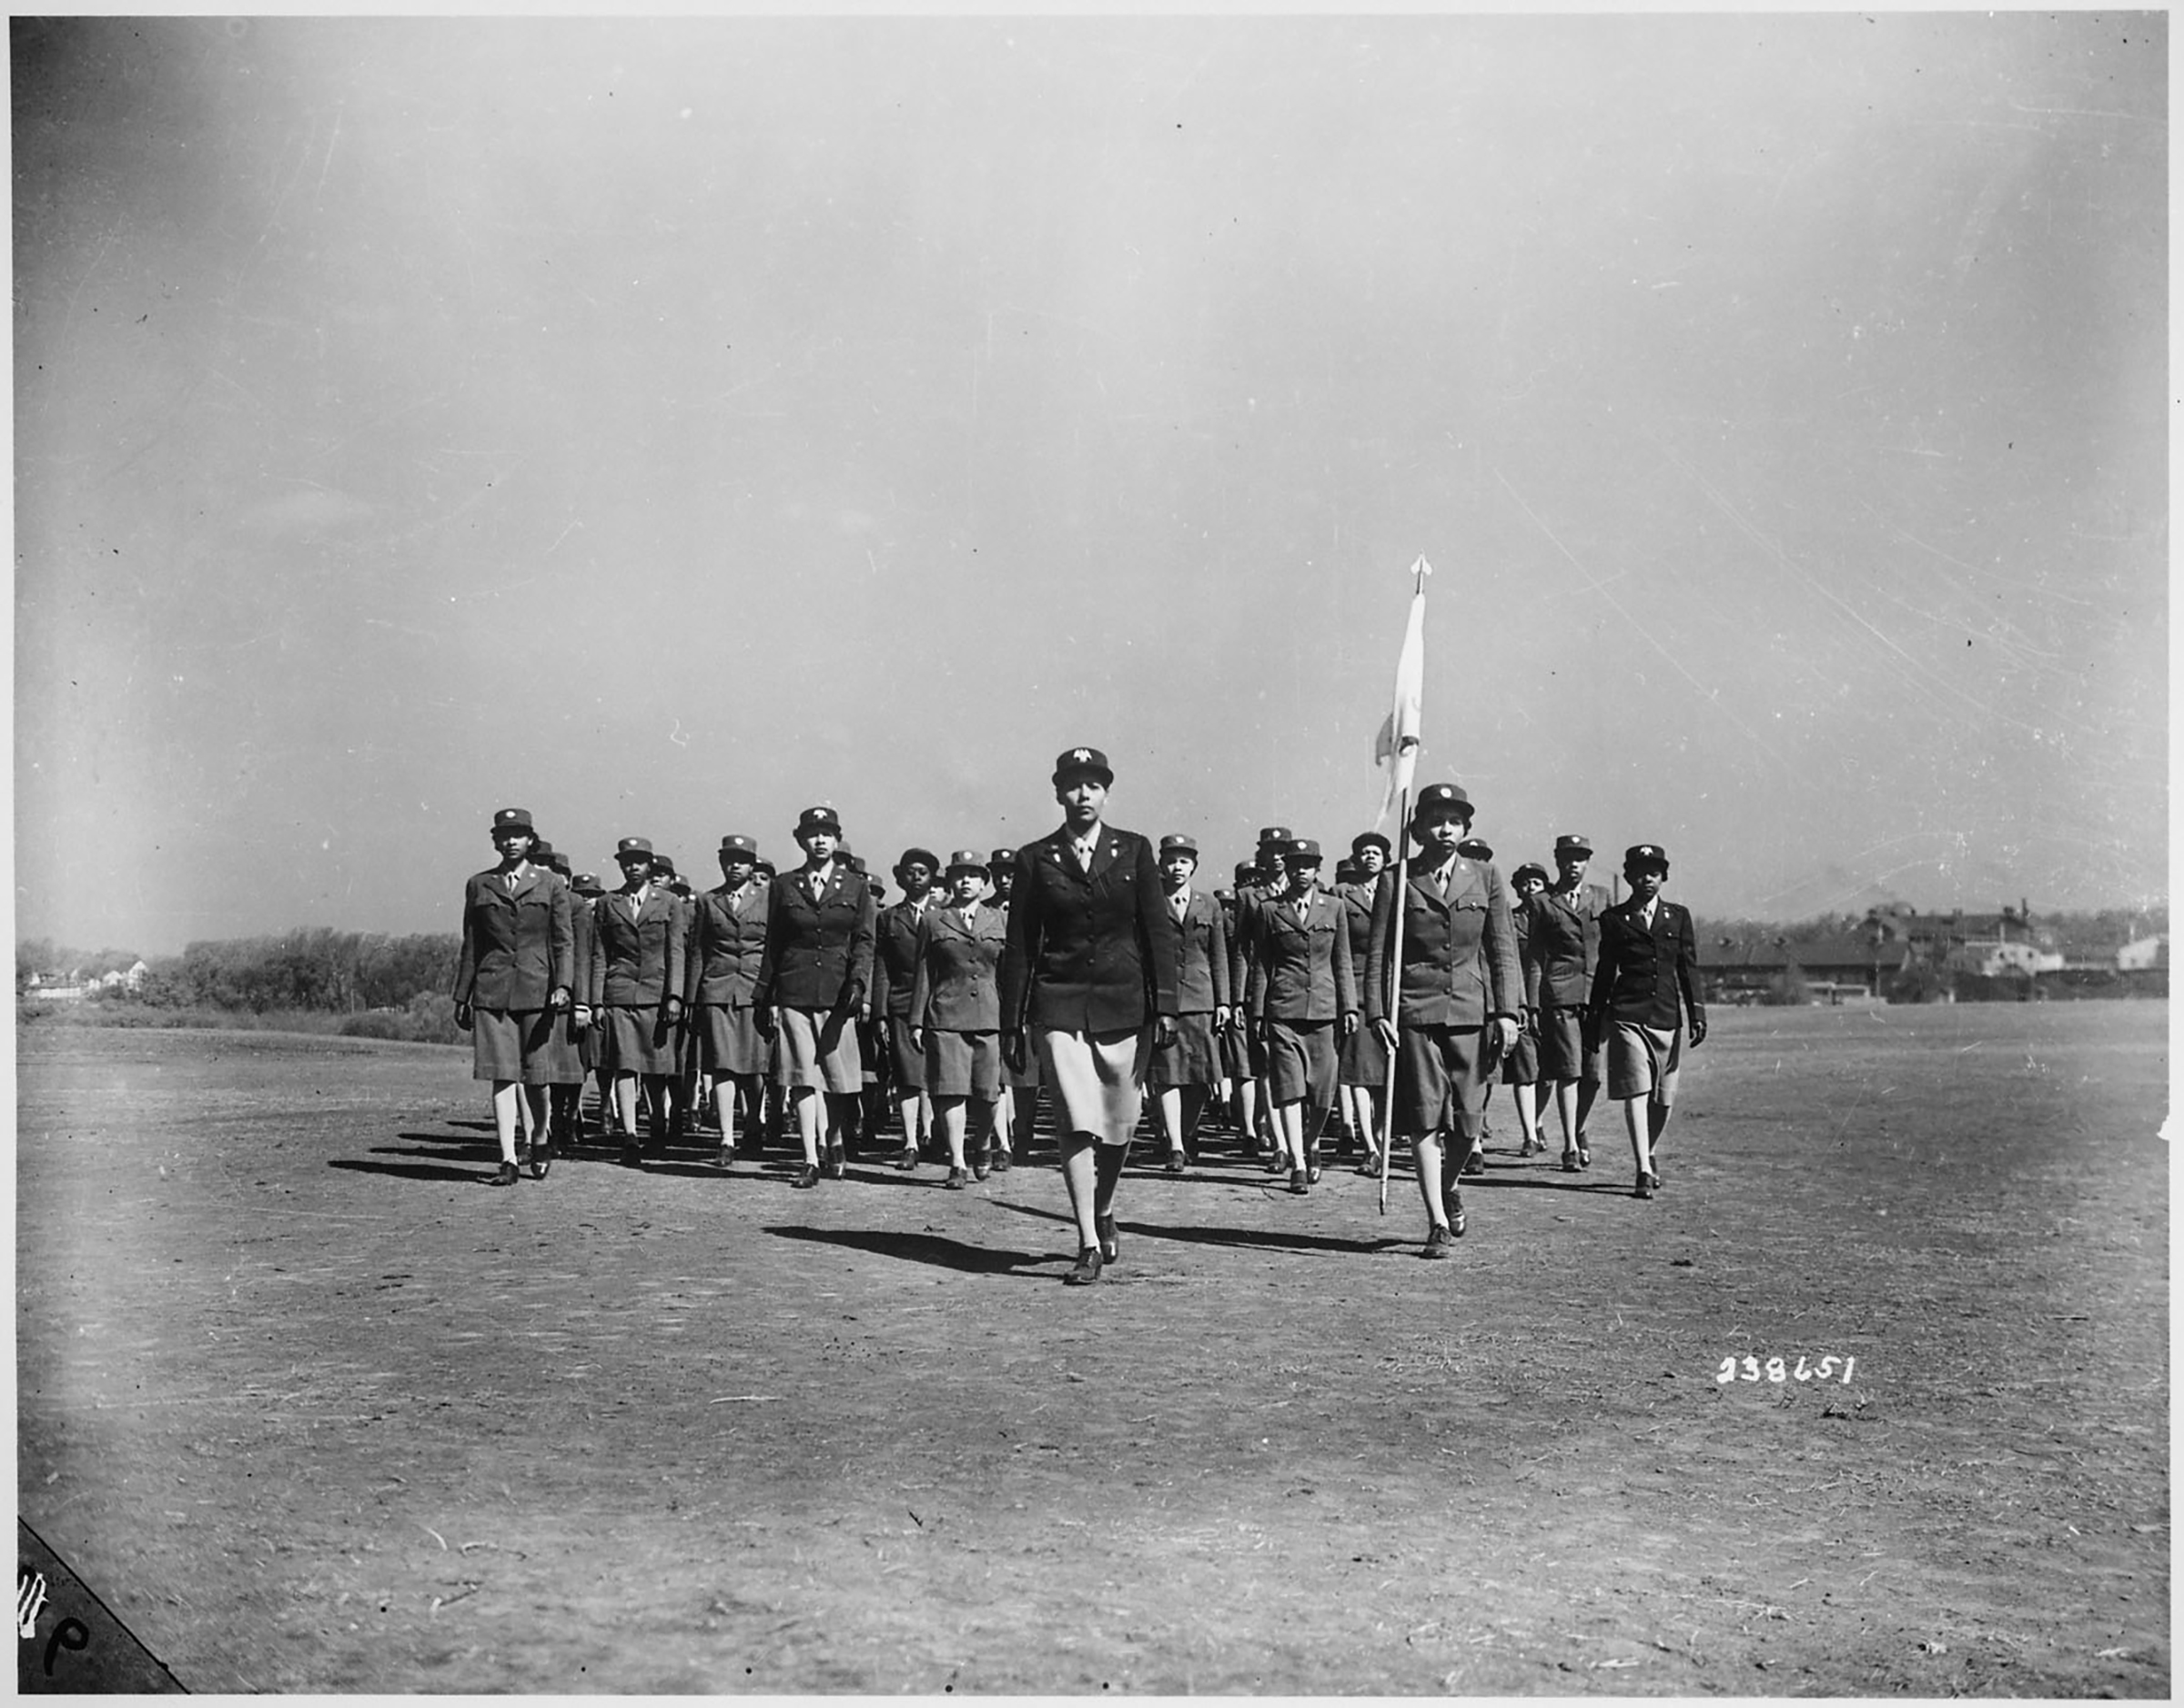 WAAC Capt. Charity Adams of Columbia, N.C., who was commissioned from the first officer candidate class, drills her company on the drill ground at the first WAAC (later WAC) Training Center, Fort Des Moines, Iowa. (nsf/Alamy)